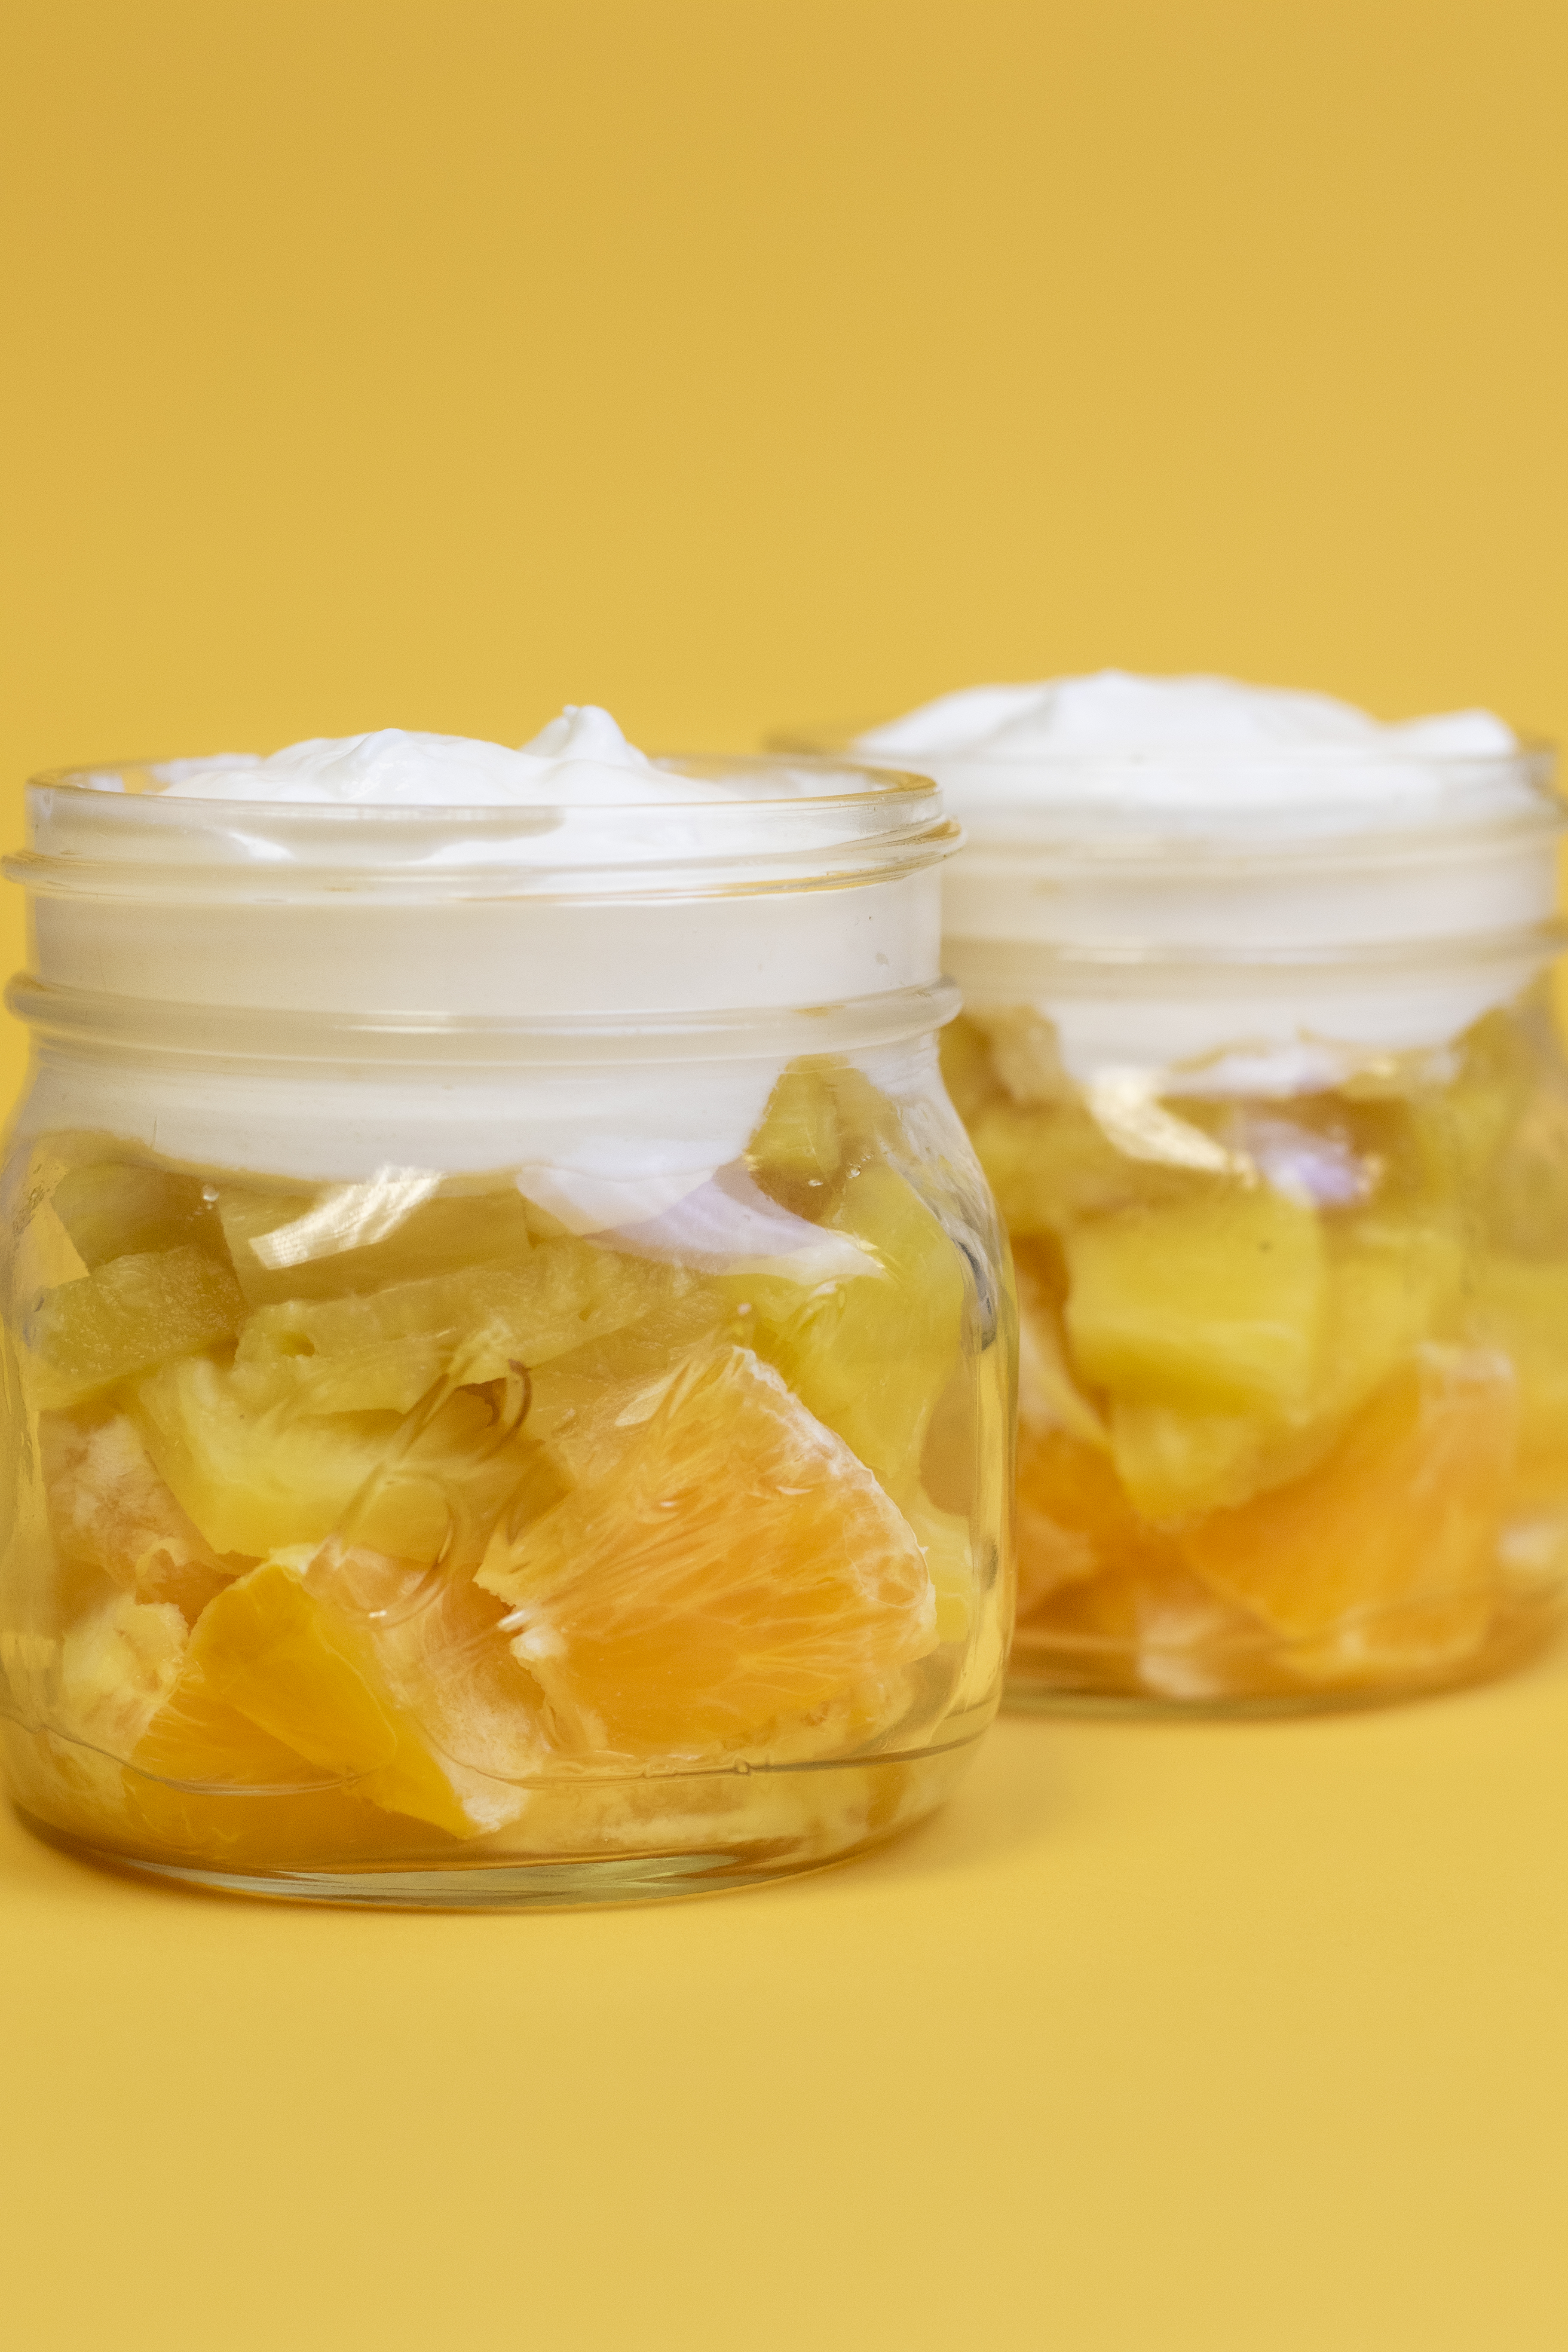 Oranges, pineapple, and whipped topping in a clear mason jar to look like a candy cane on a yellow backdrop.